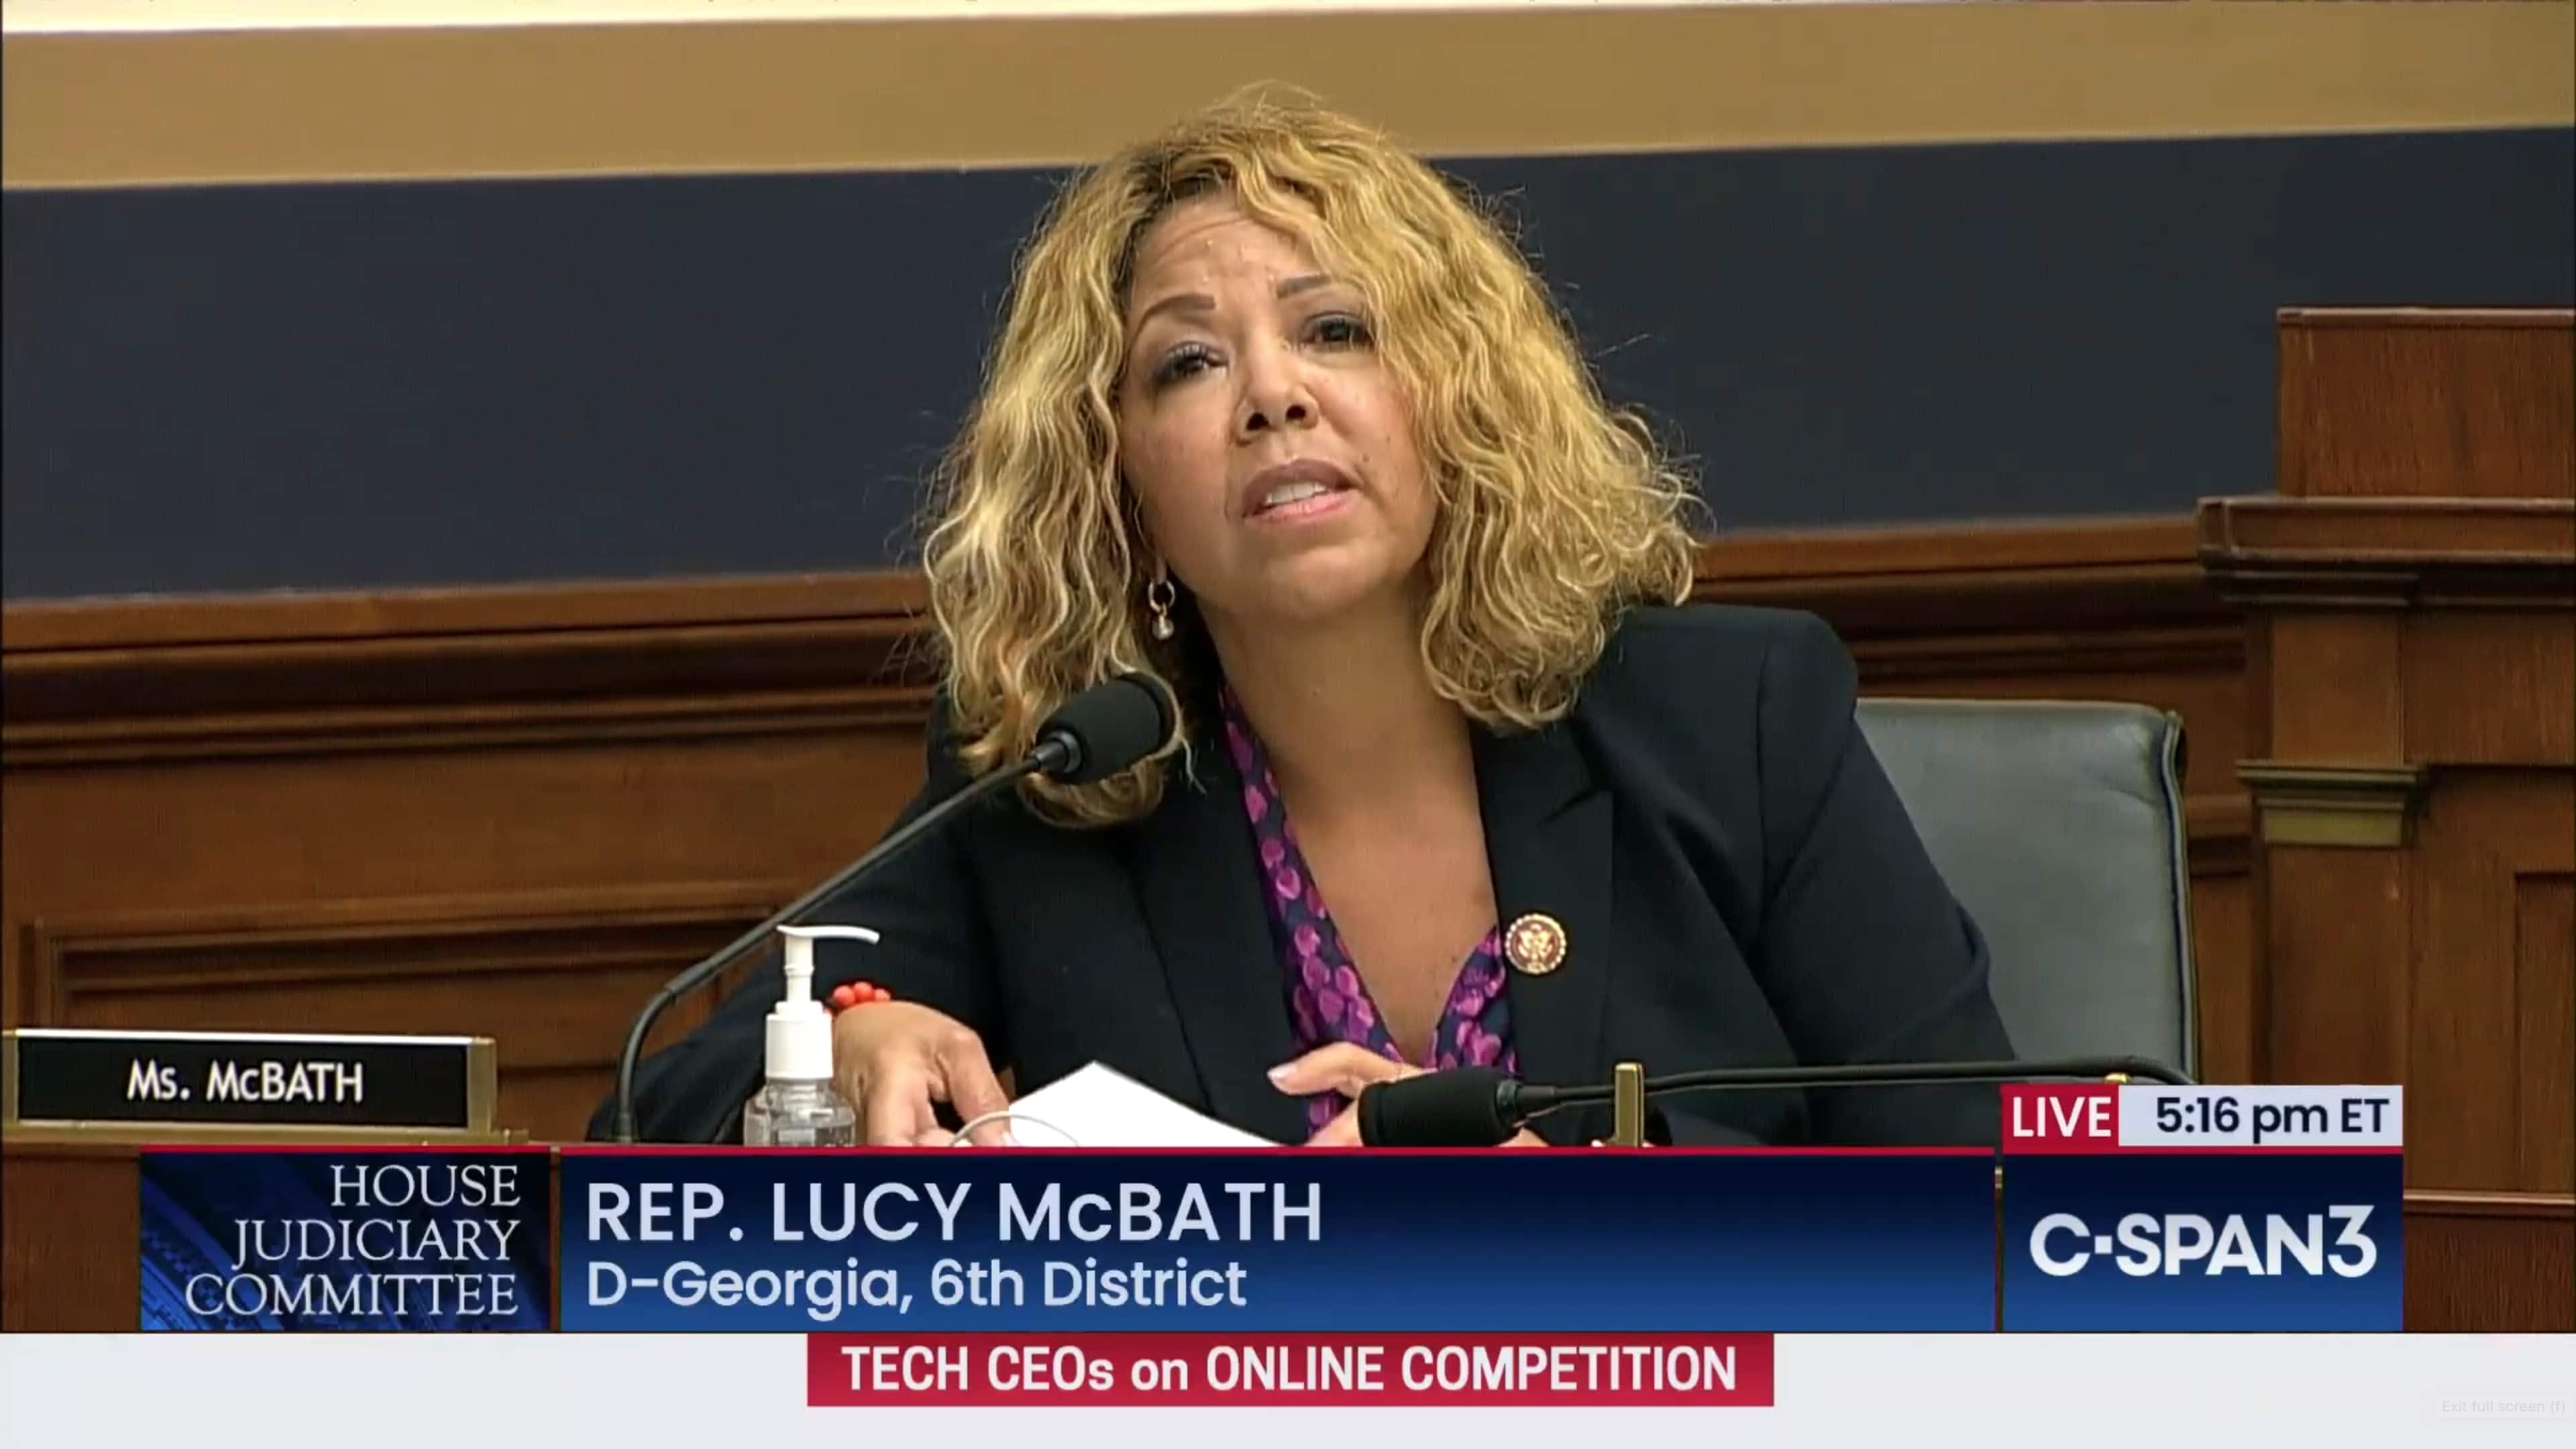 Rep. Lucy McBath did issue some pointed questions about Apple's business practices during the House Judiciary antitrust subcommittee hearing.